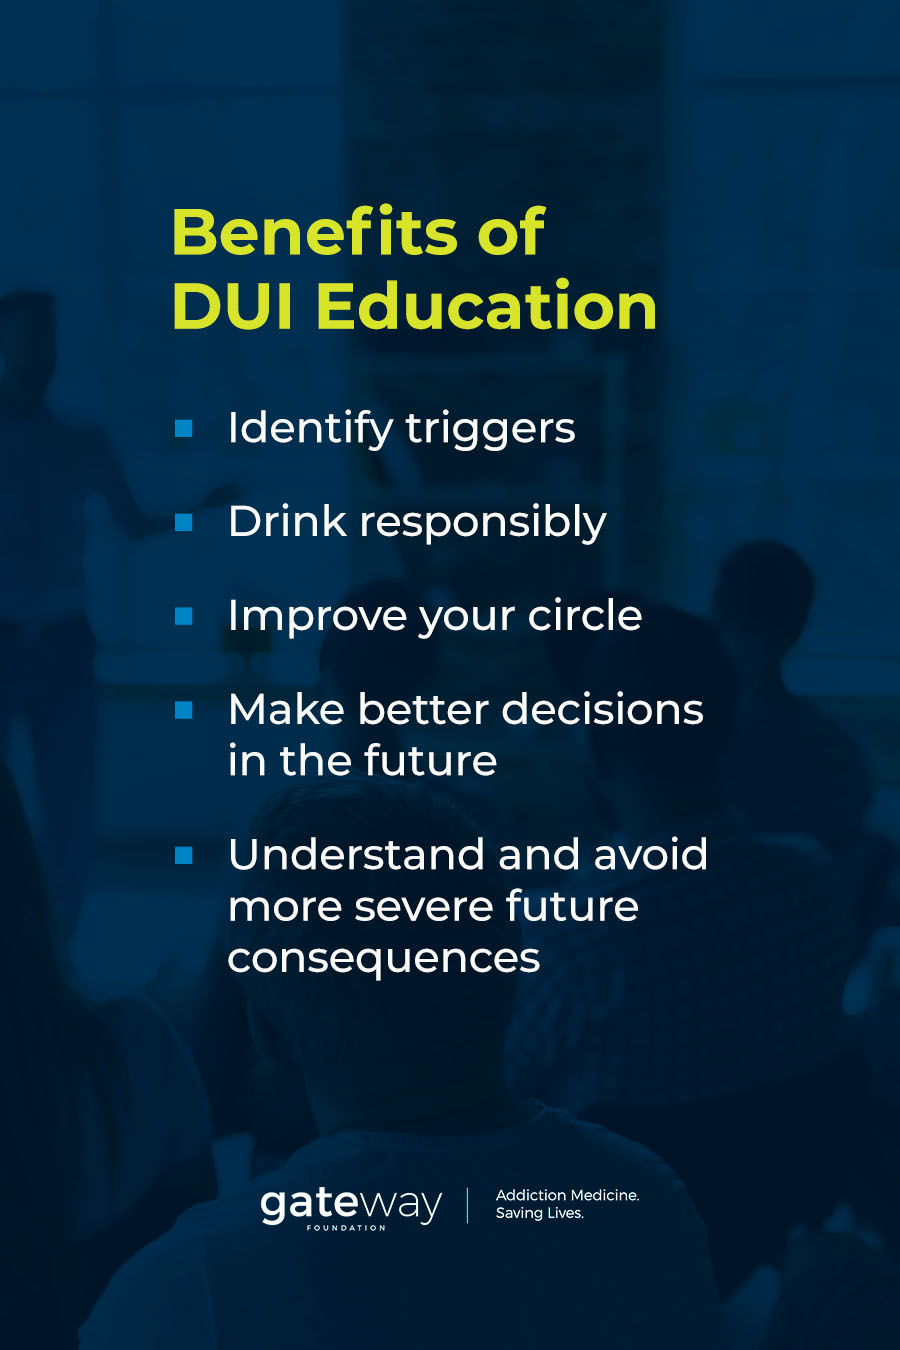 The Benefits of DUI Education